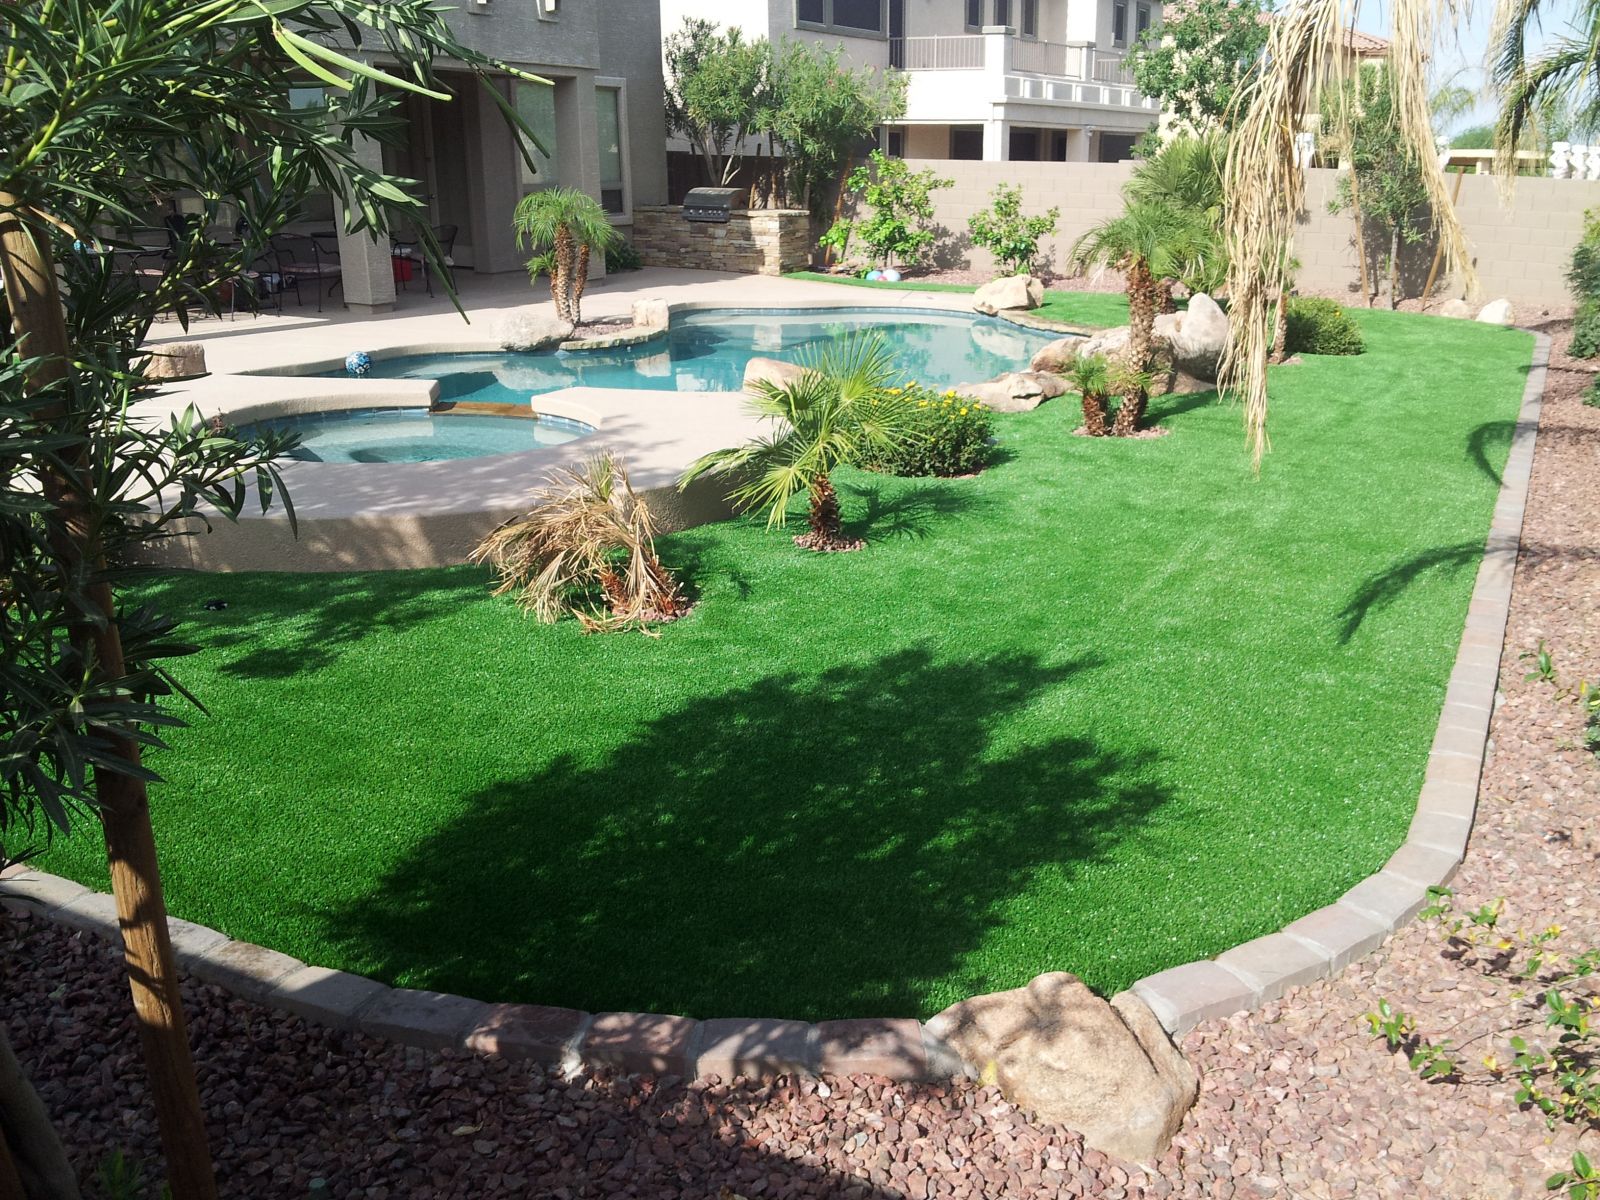 Transform Your Lawn Today with Luxury Turf in Gilbert, AZ